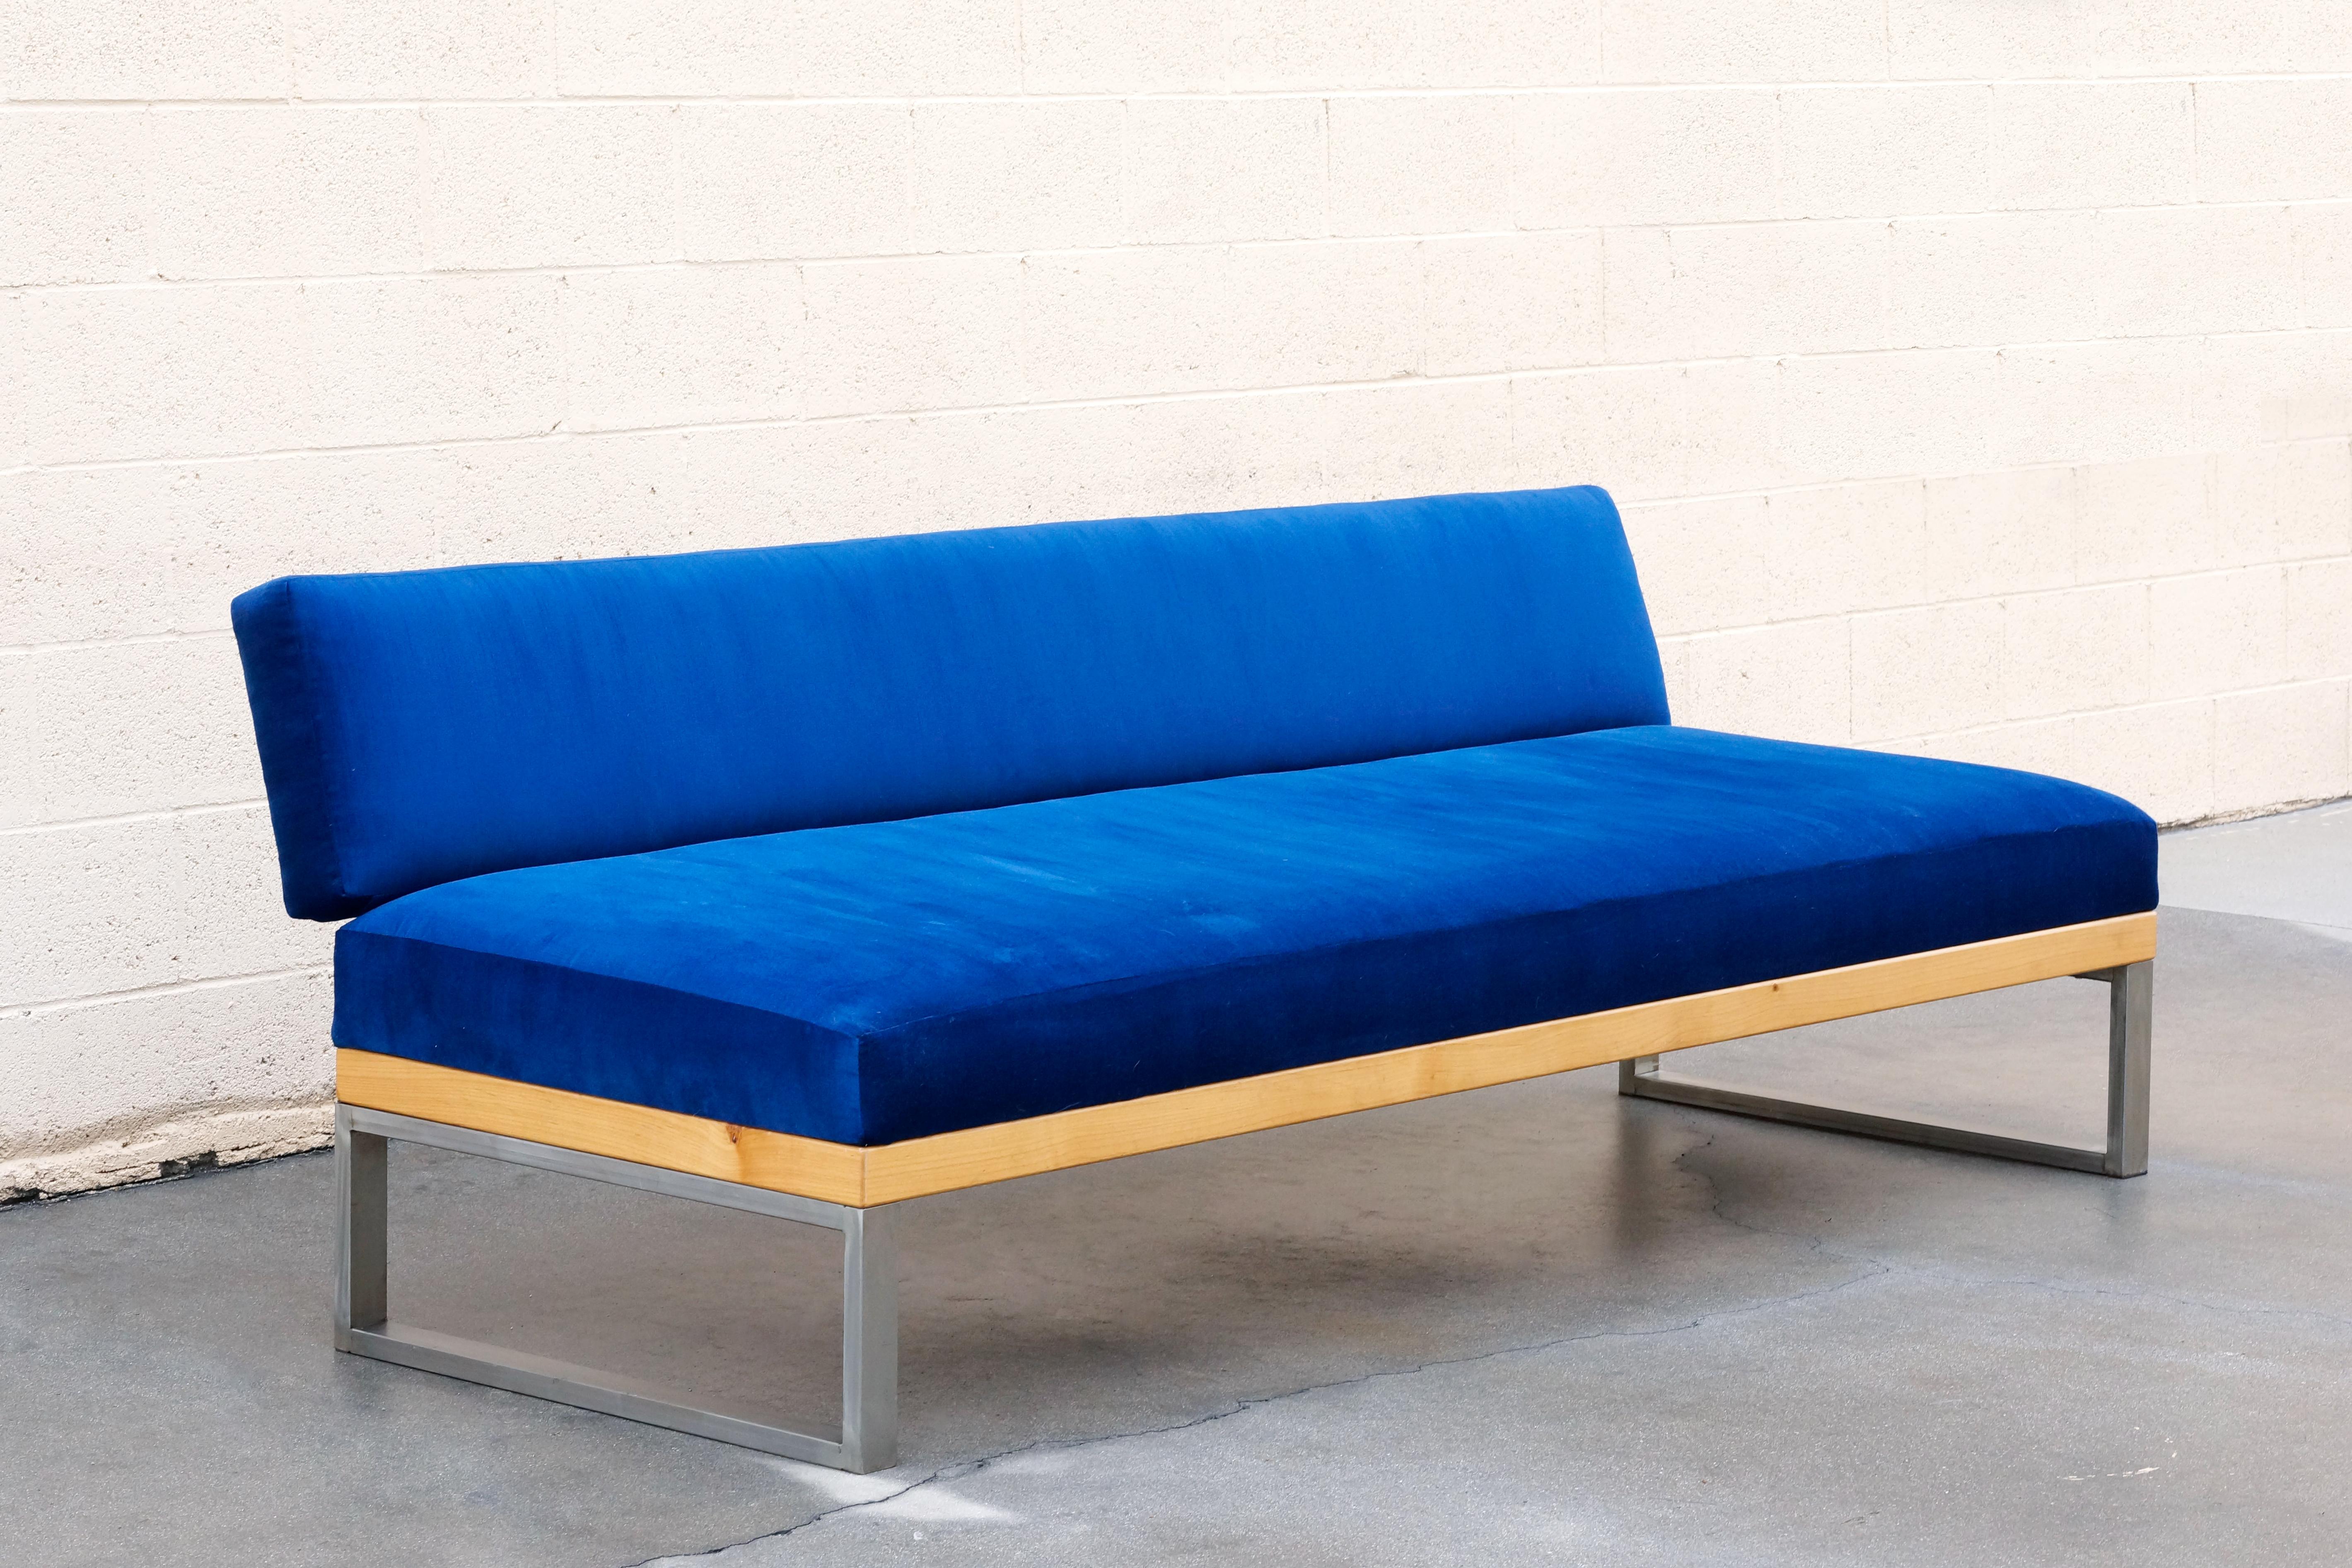 1950s inspired, custom built daybed made with alder wood, steel and blue velvet upholstery. It's spacious, extra-comfy and heavy-duty. This is a quality constructed piece built to last. Light patina on the steel for an industrial look. Newly